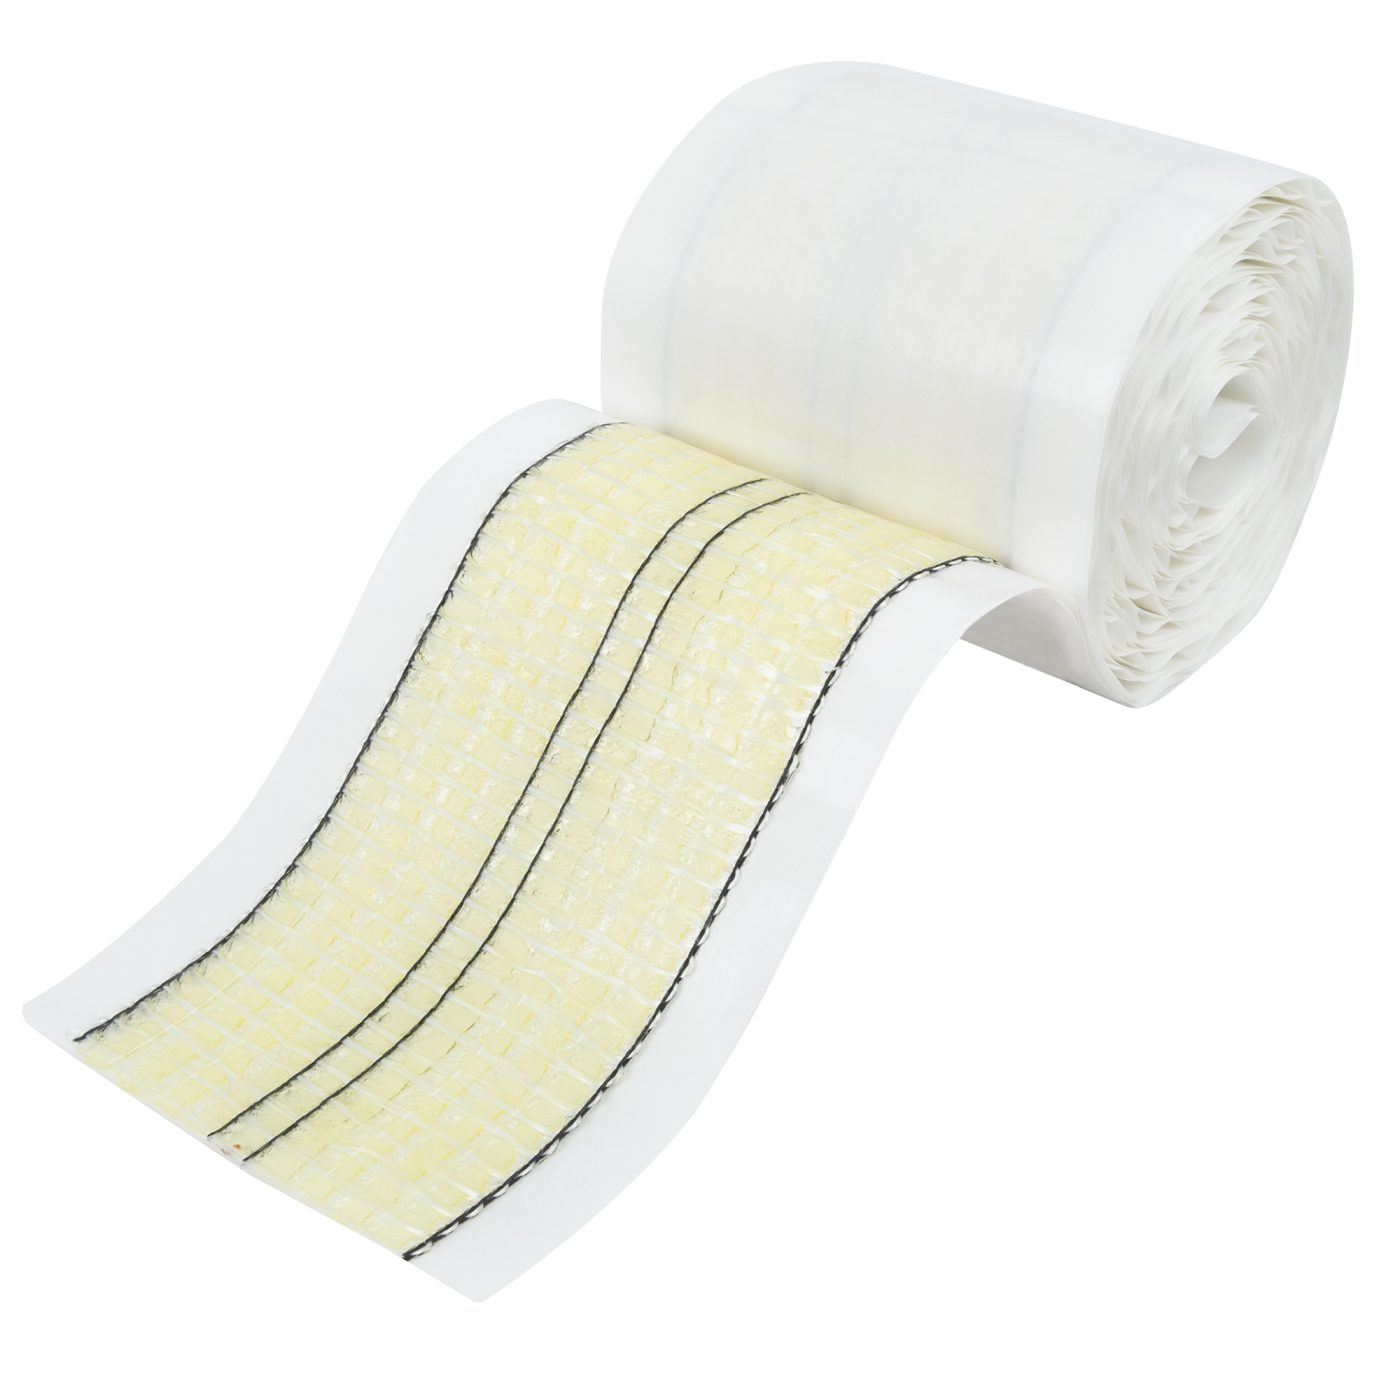 DOUBLE-SIDED CARPET TAPE - Roberts Consolidated